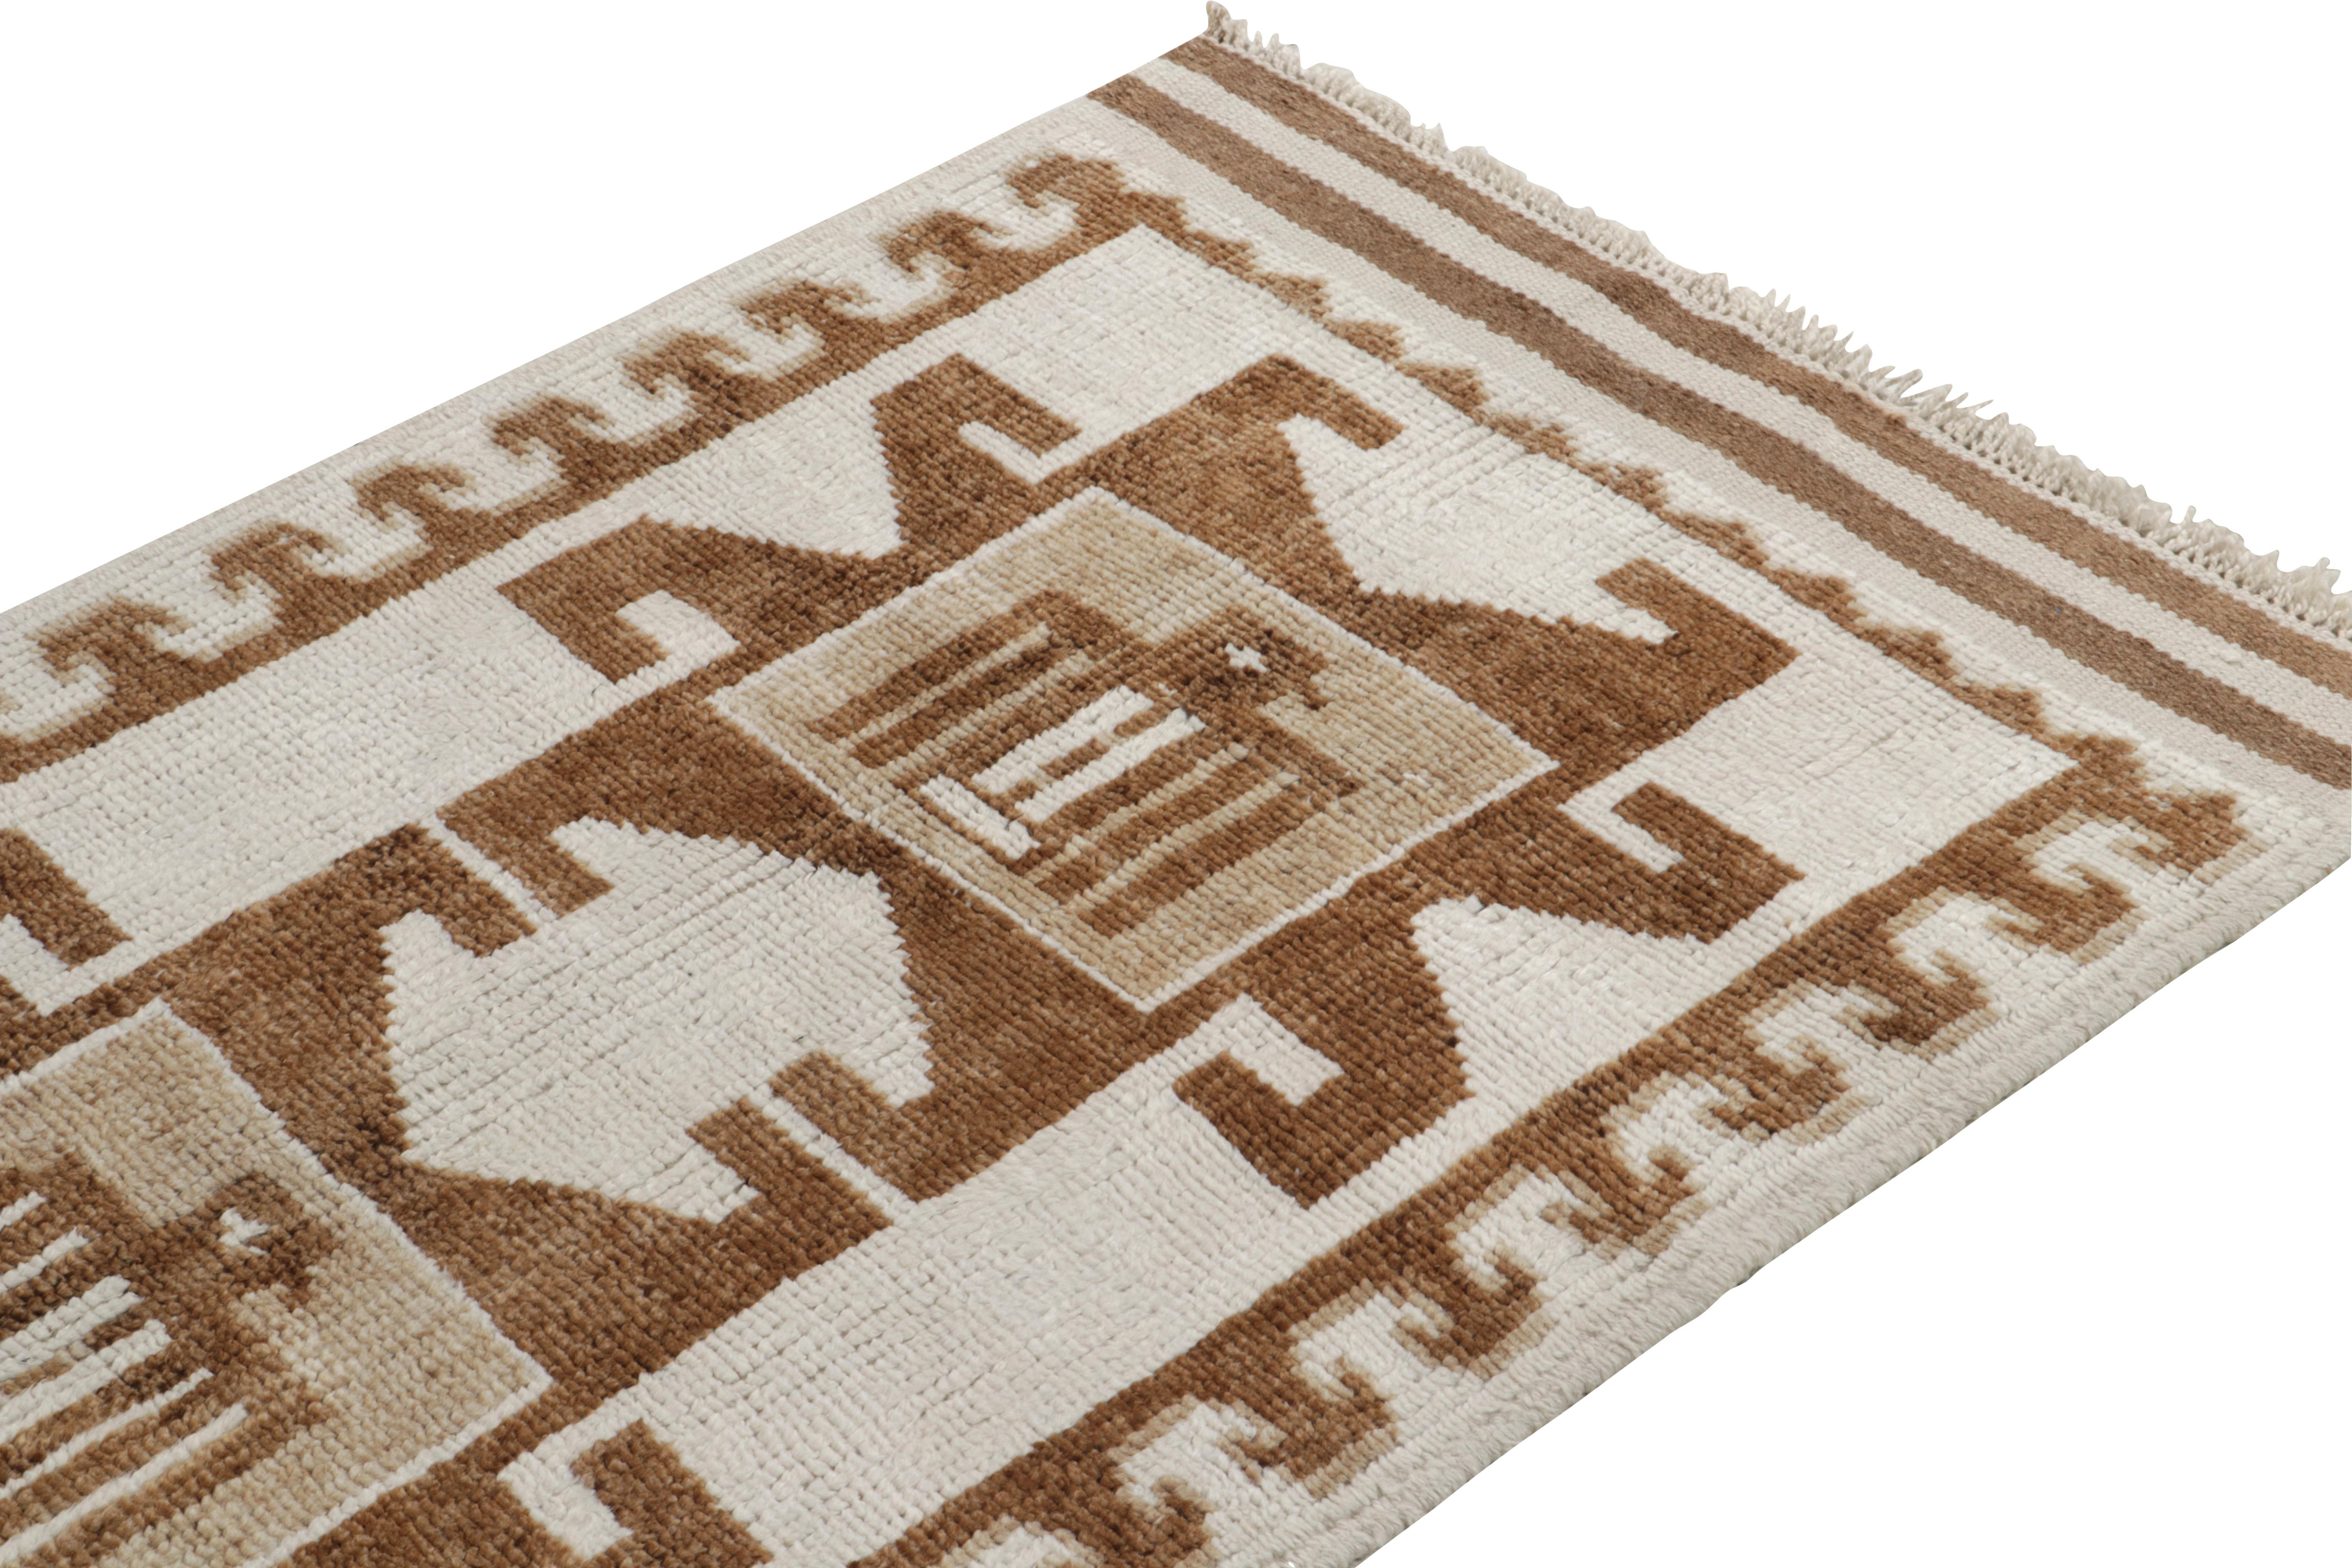 Hand-Knotted Vintage Tribal Runner in White & Beige-Brown Geometric Patterns by Rug & Kilim For Sale